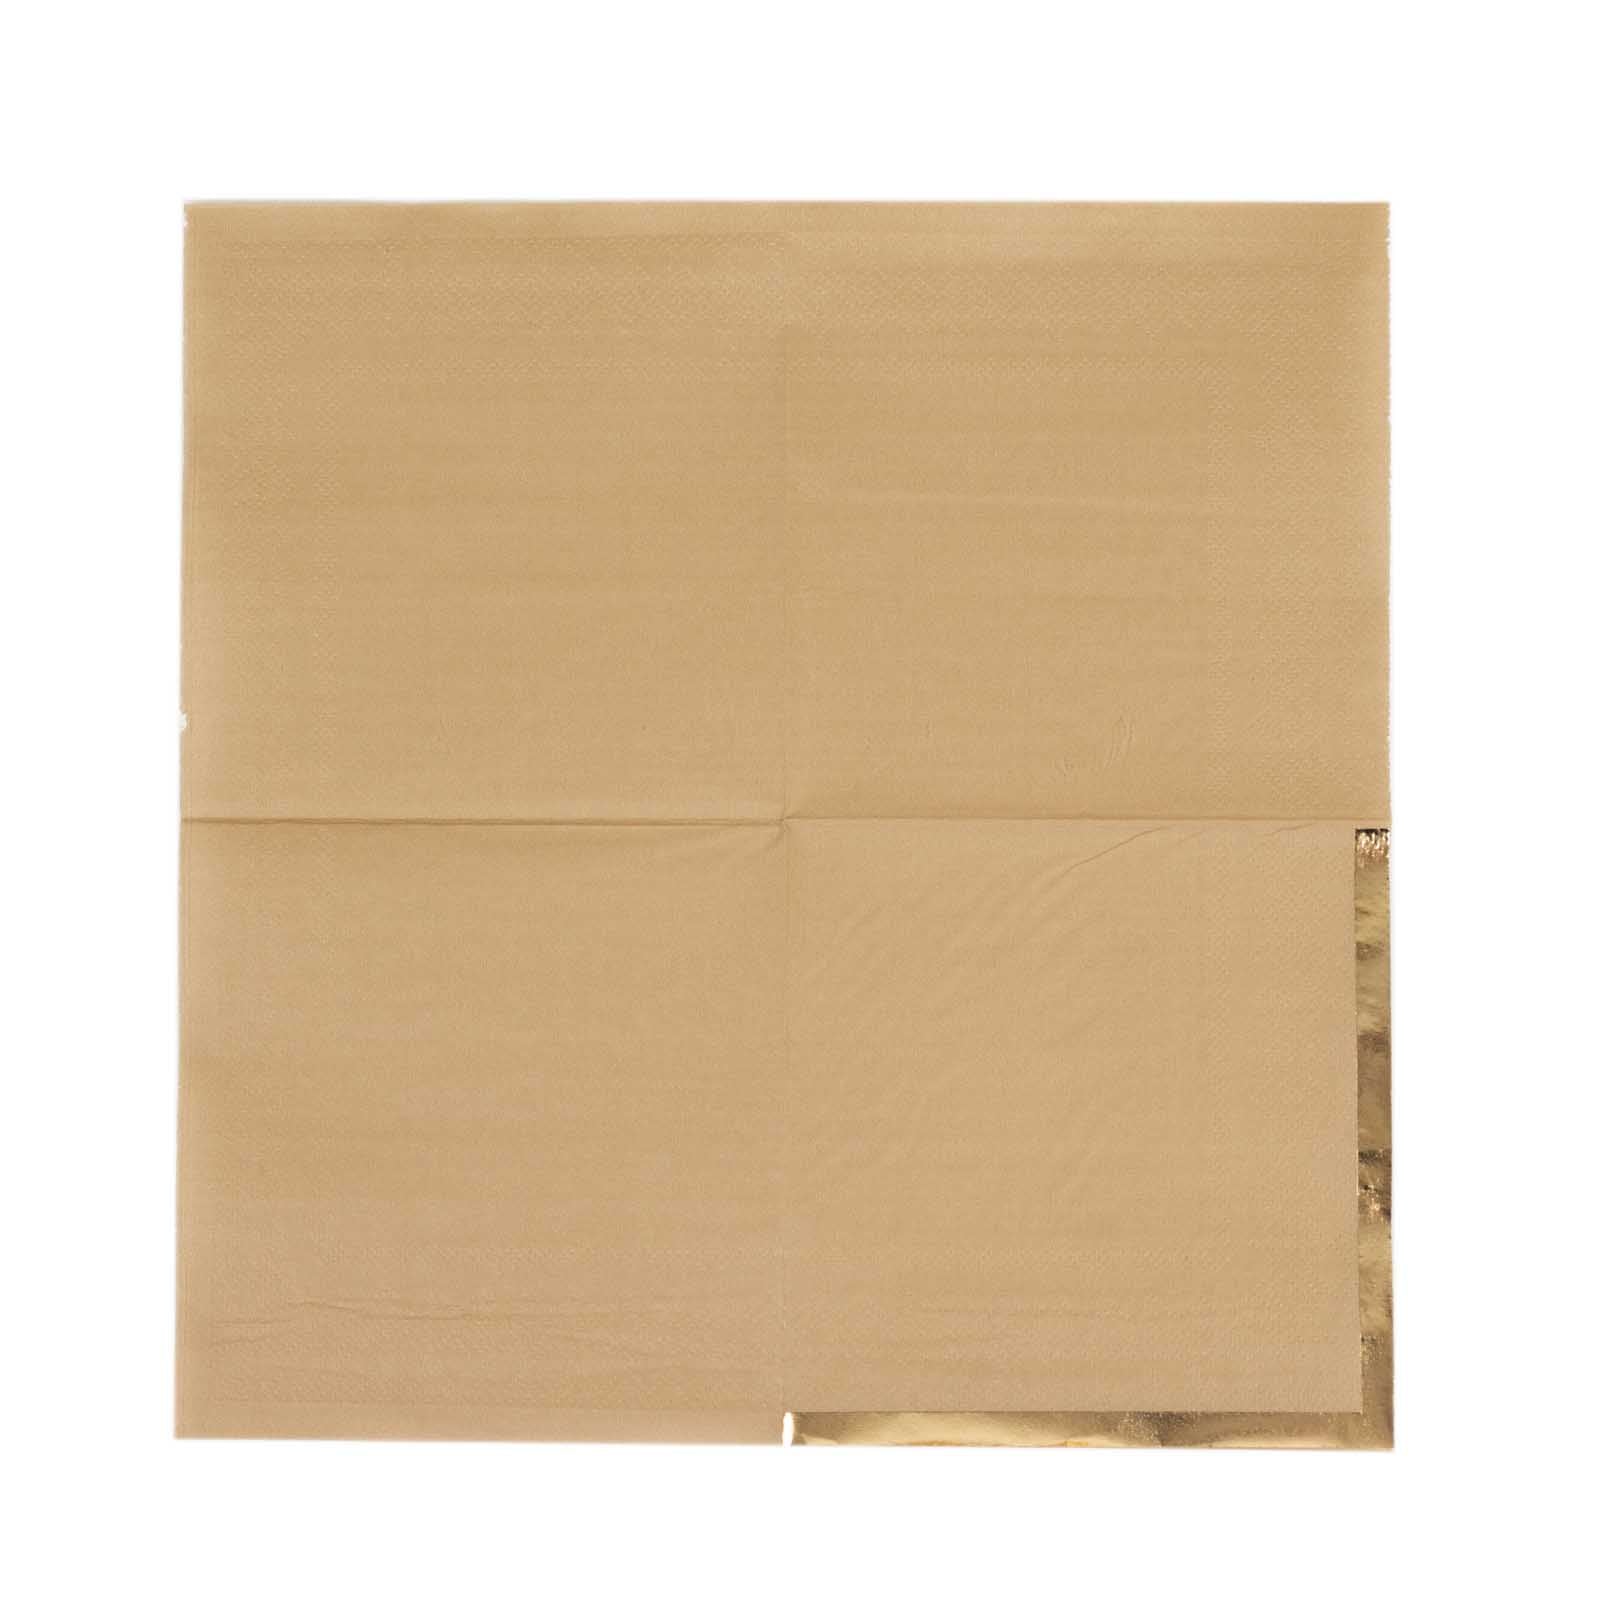 50 Soft 2 Ply Disposable Dinner Cocktail Paper Napkins with Gold Foil Edge